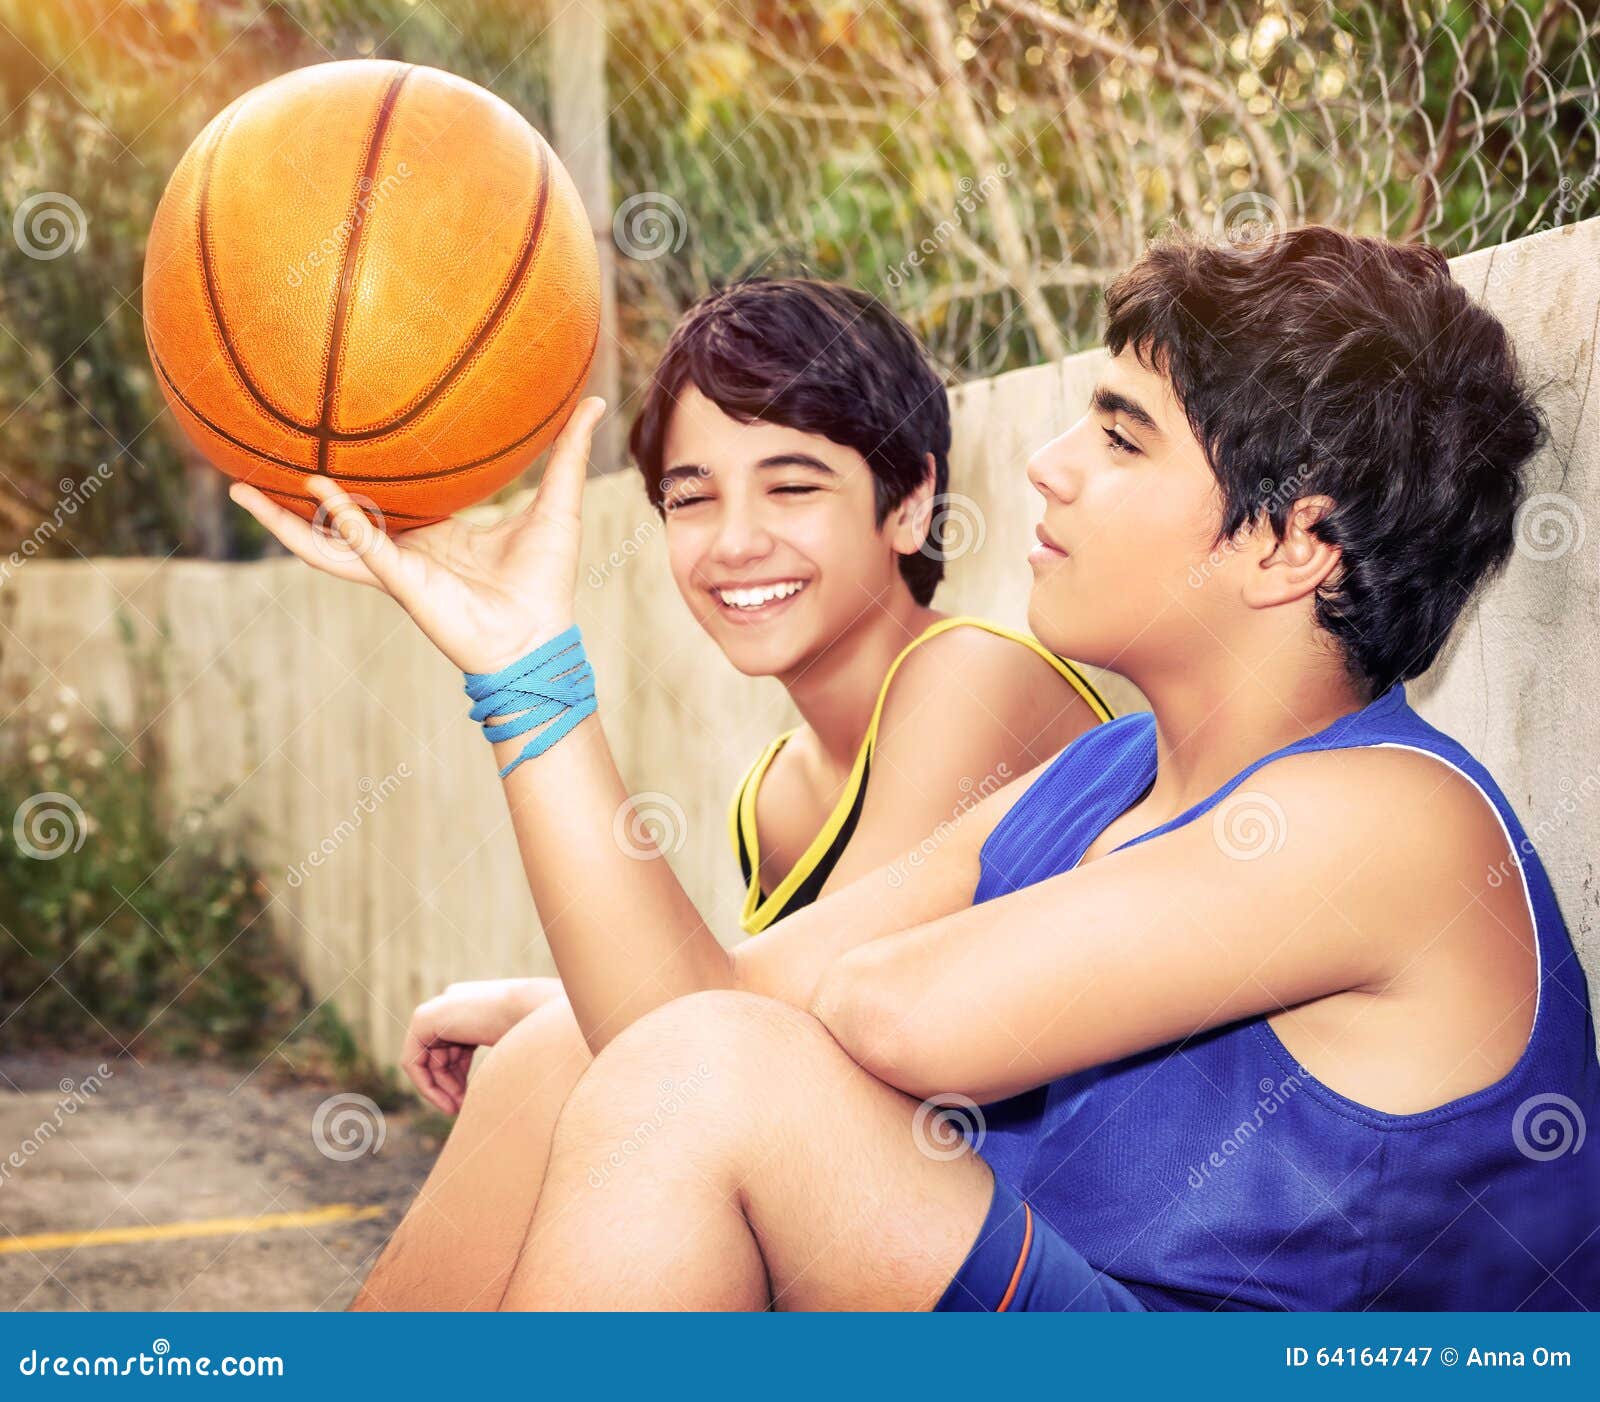 Happy Basketball Players Stock Image Image Of Outside 64164747